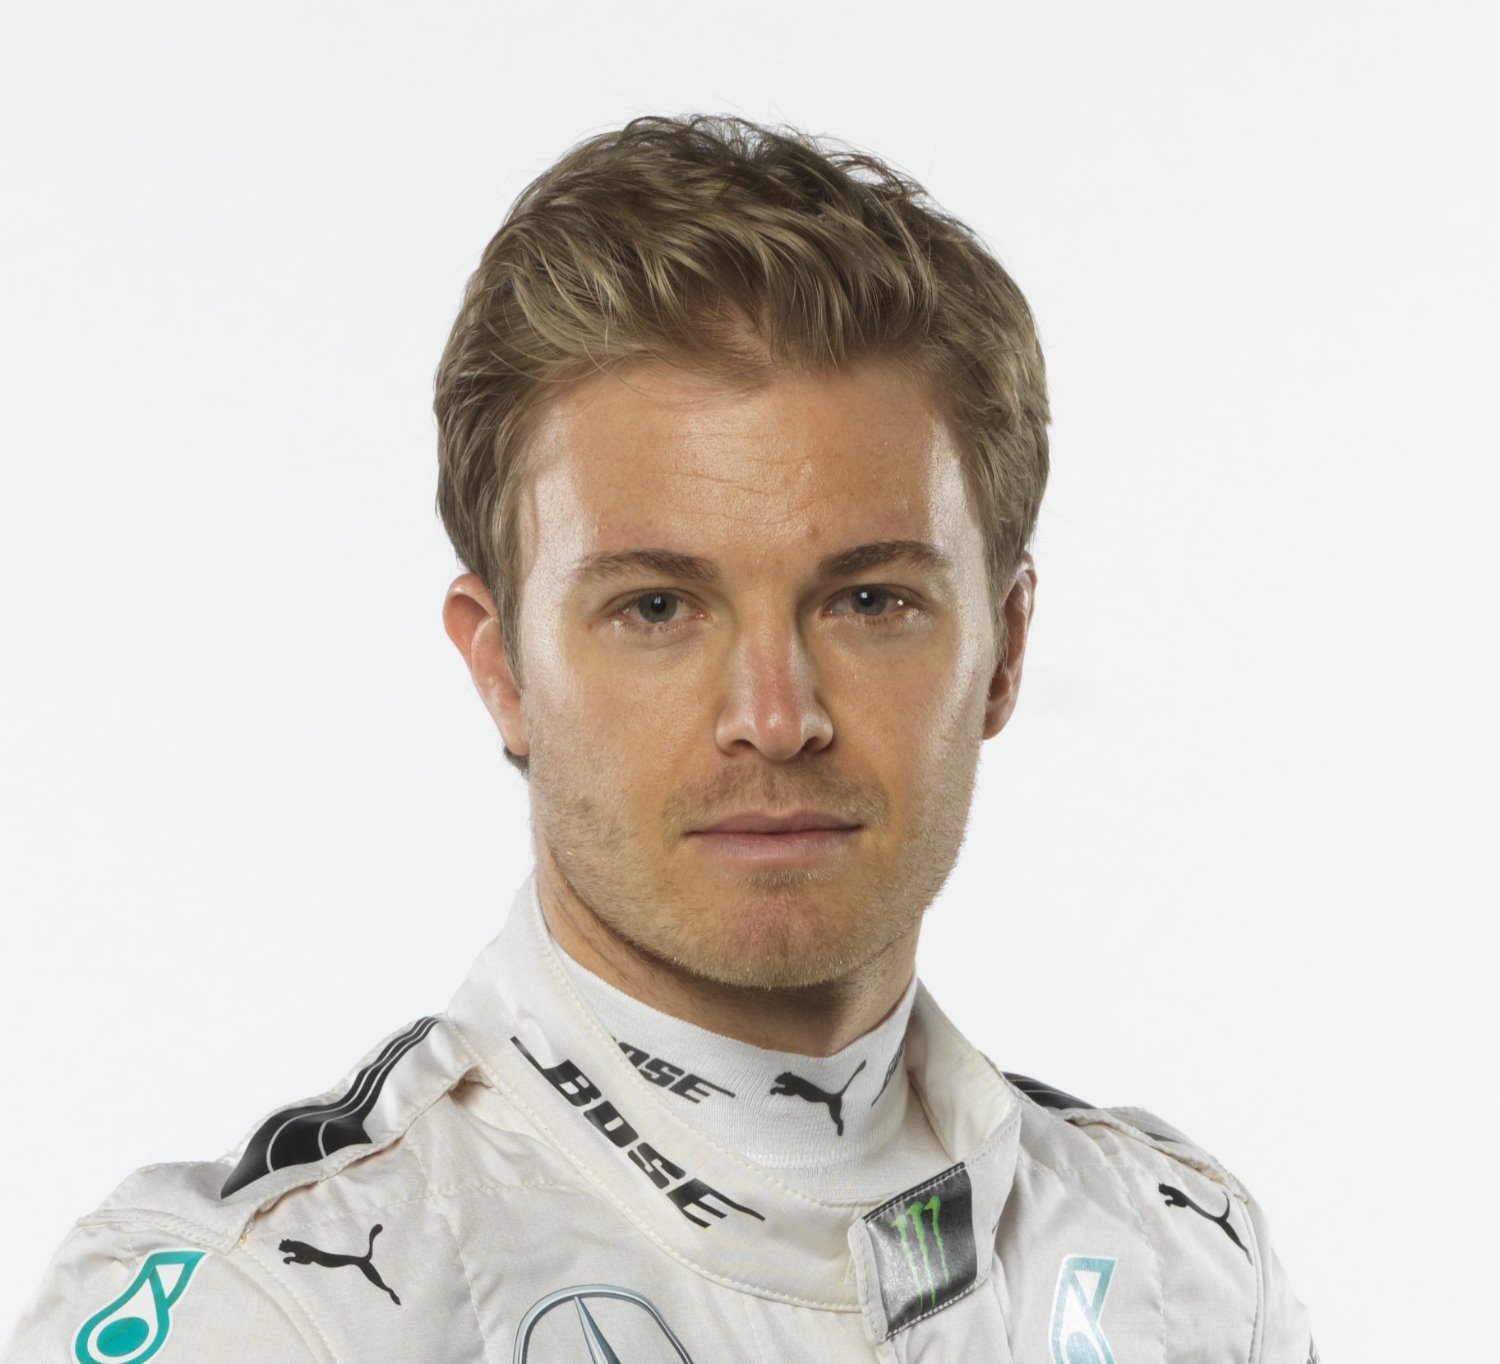 2016 F1 champion Nico Rosberg to be re-signed